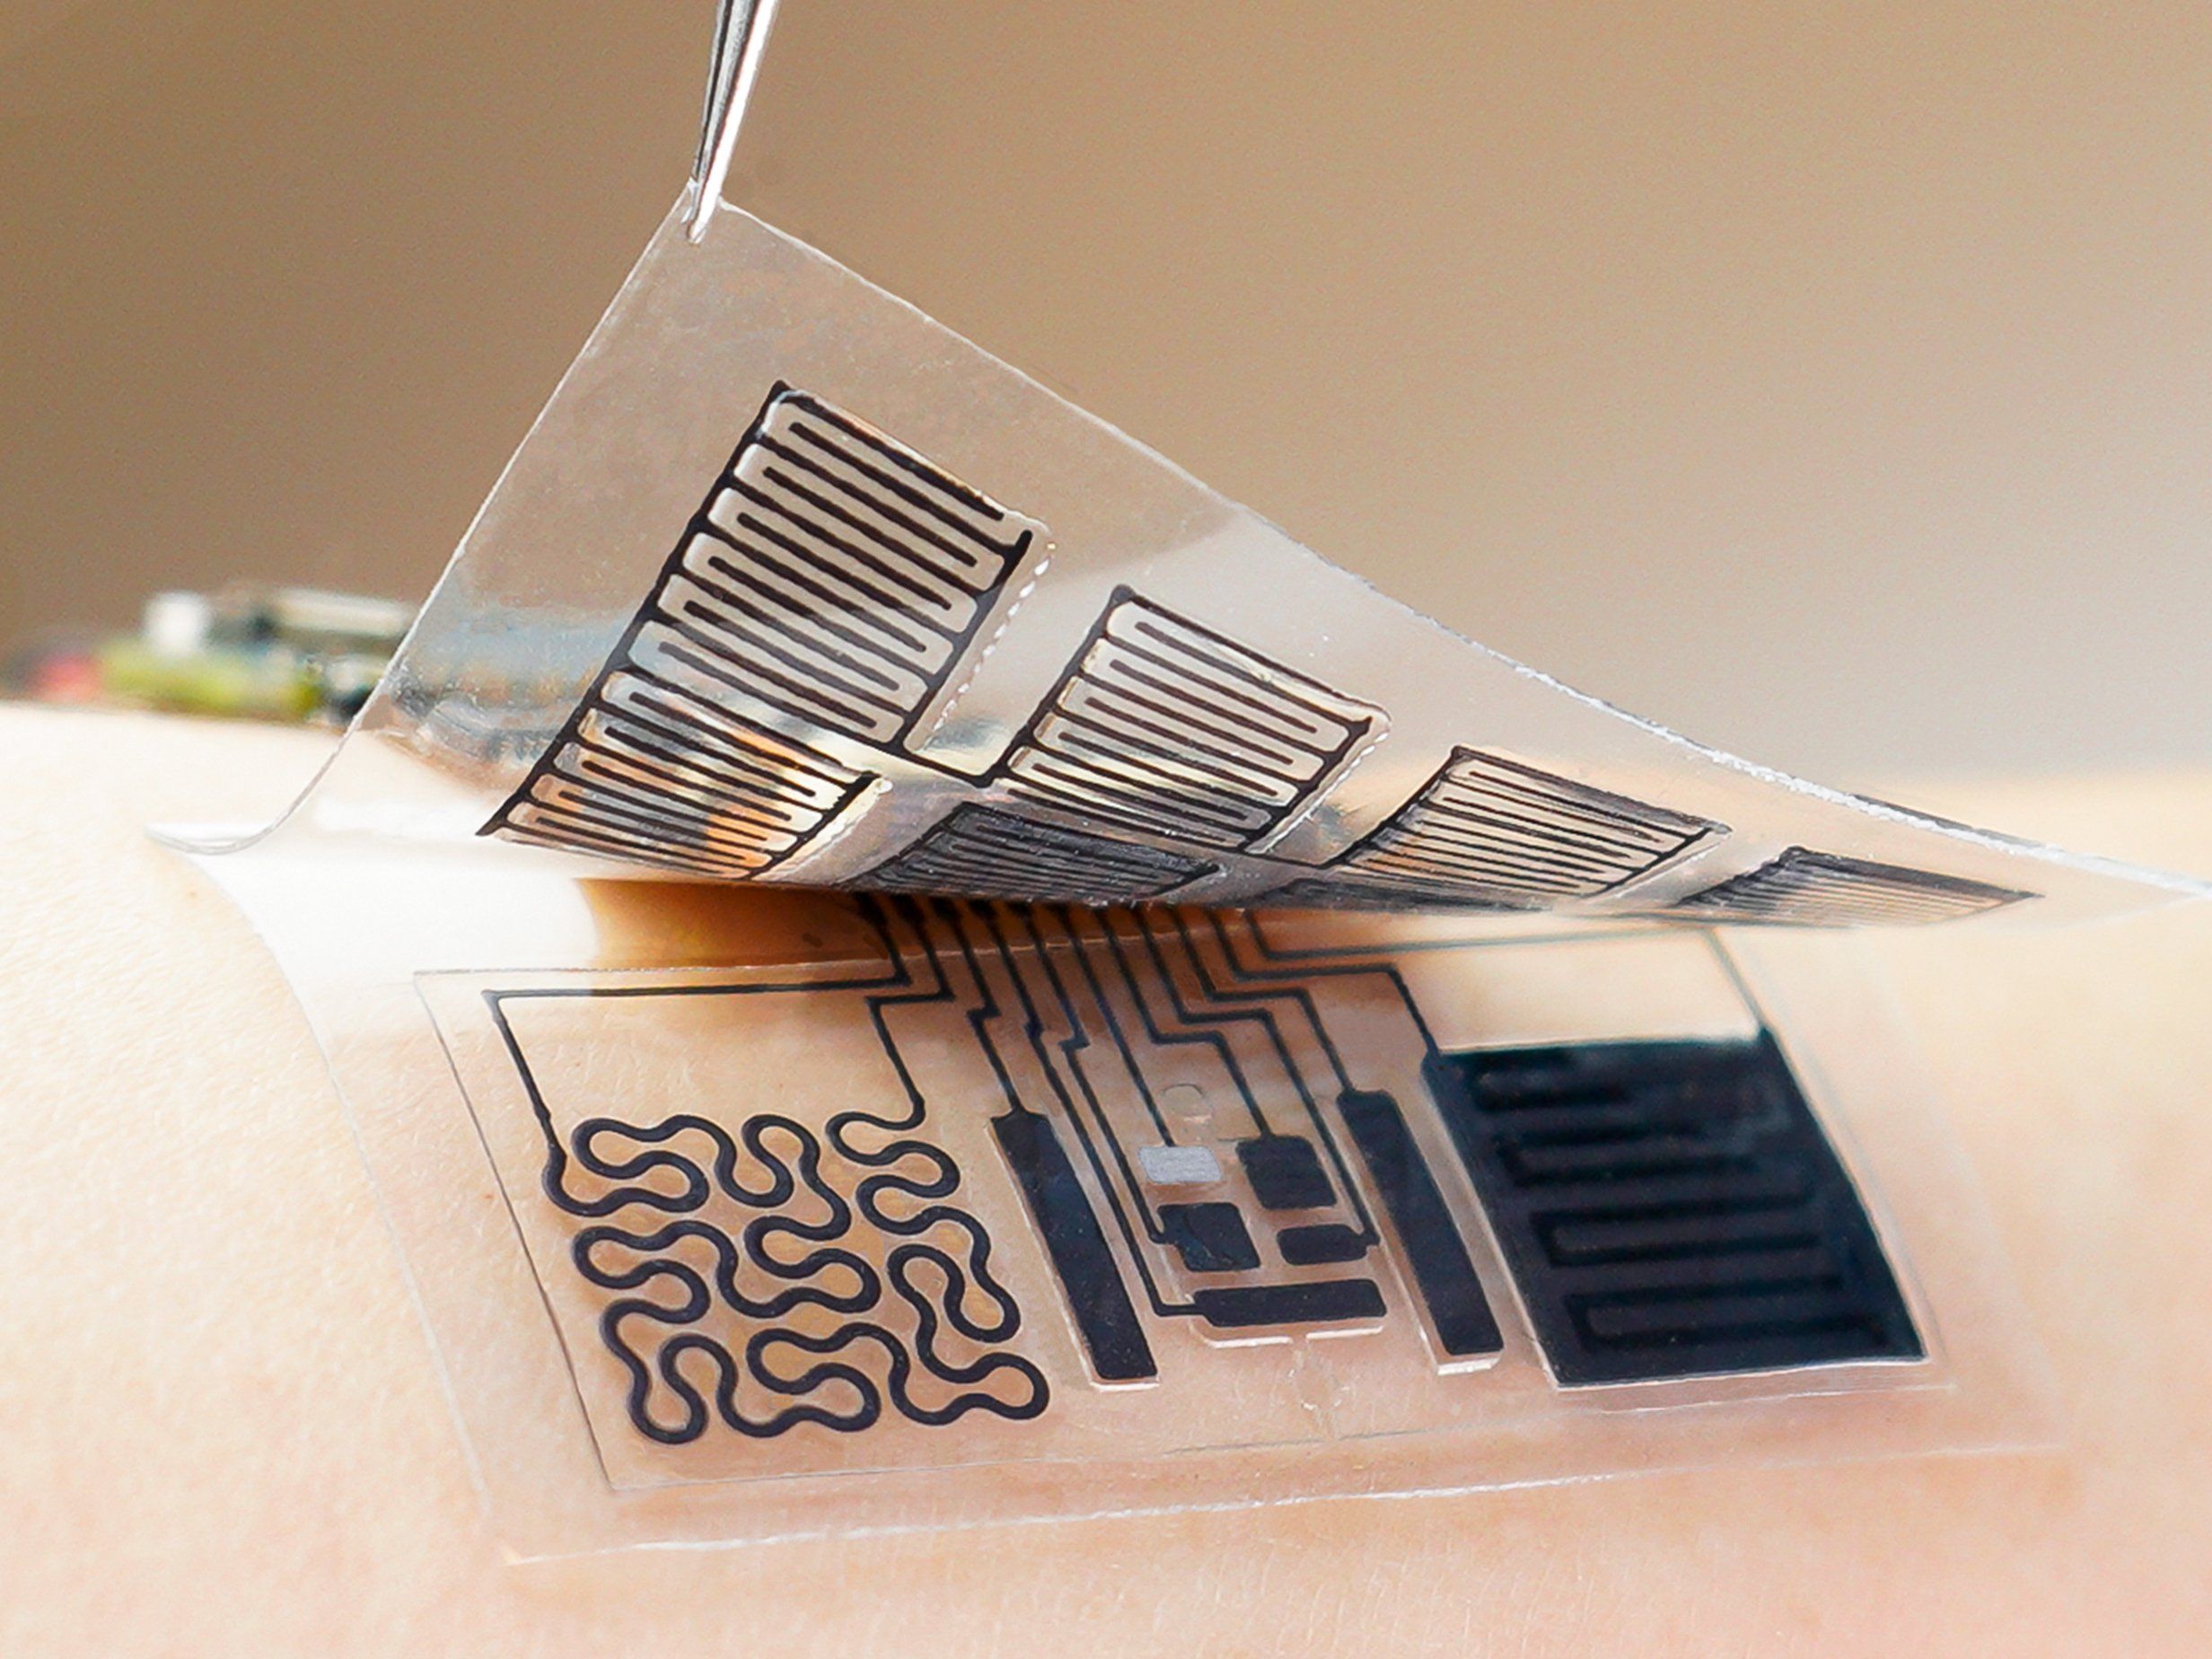 A piece of material with a black circuitry pattern is pealing off a second piece, with an intricate electronics pattern, which sits on a person's skin.